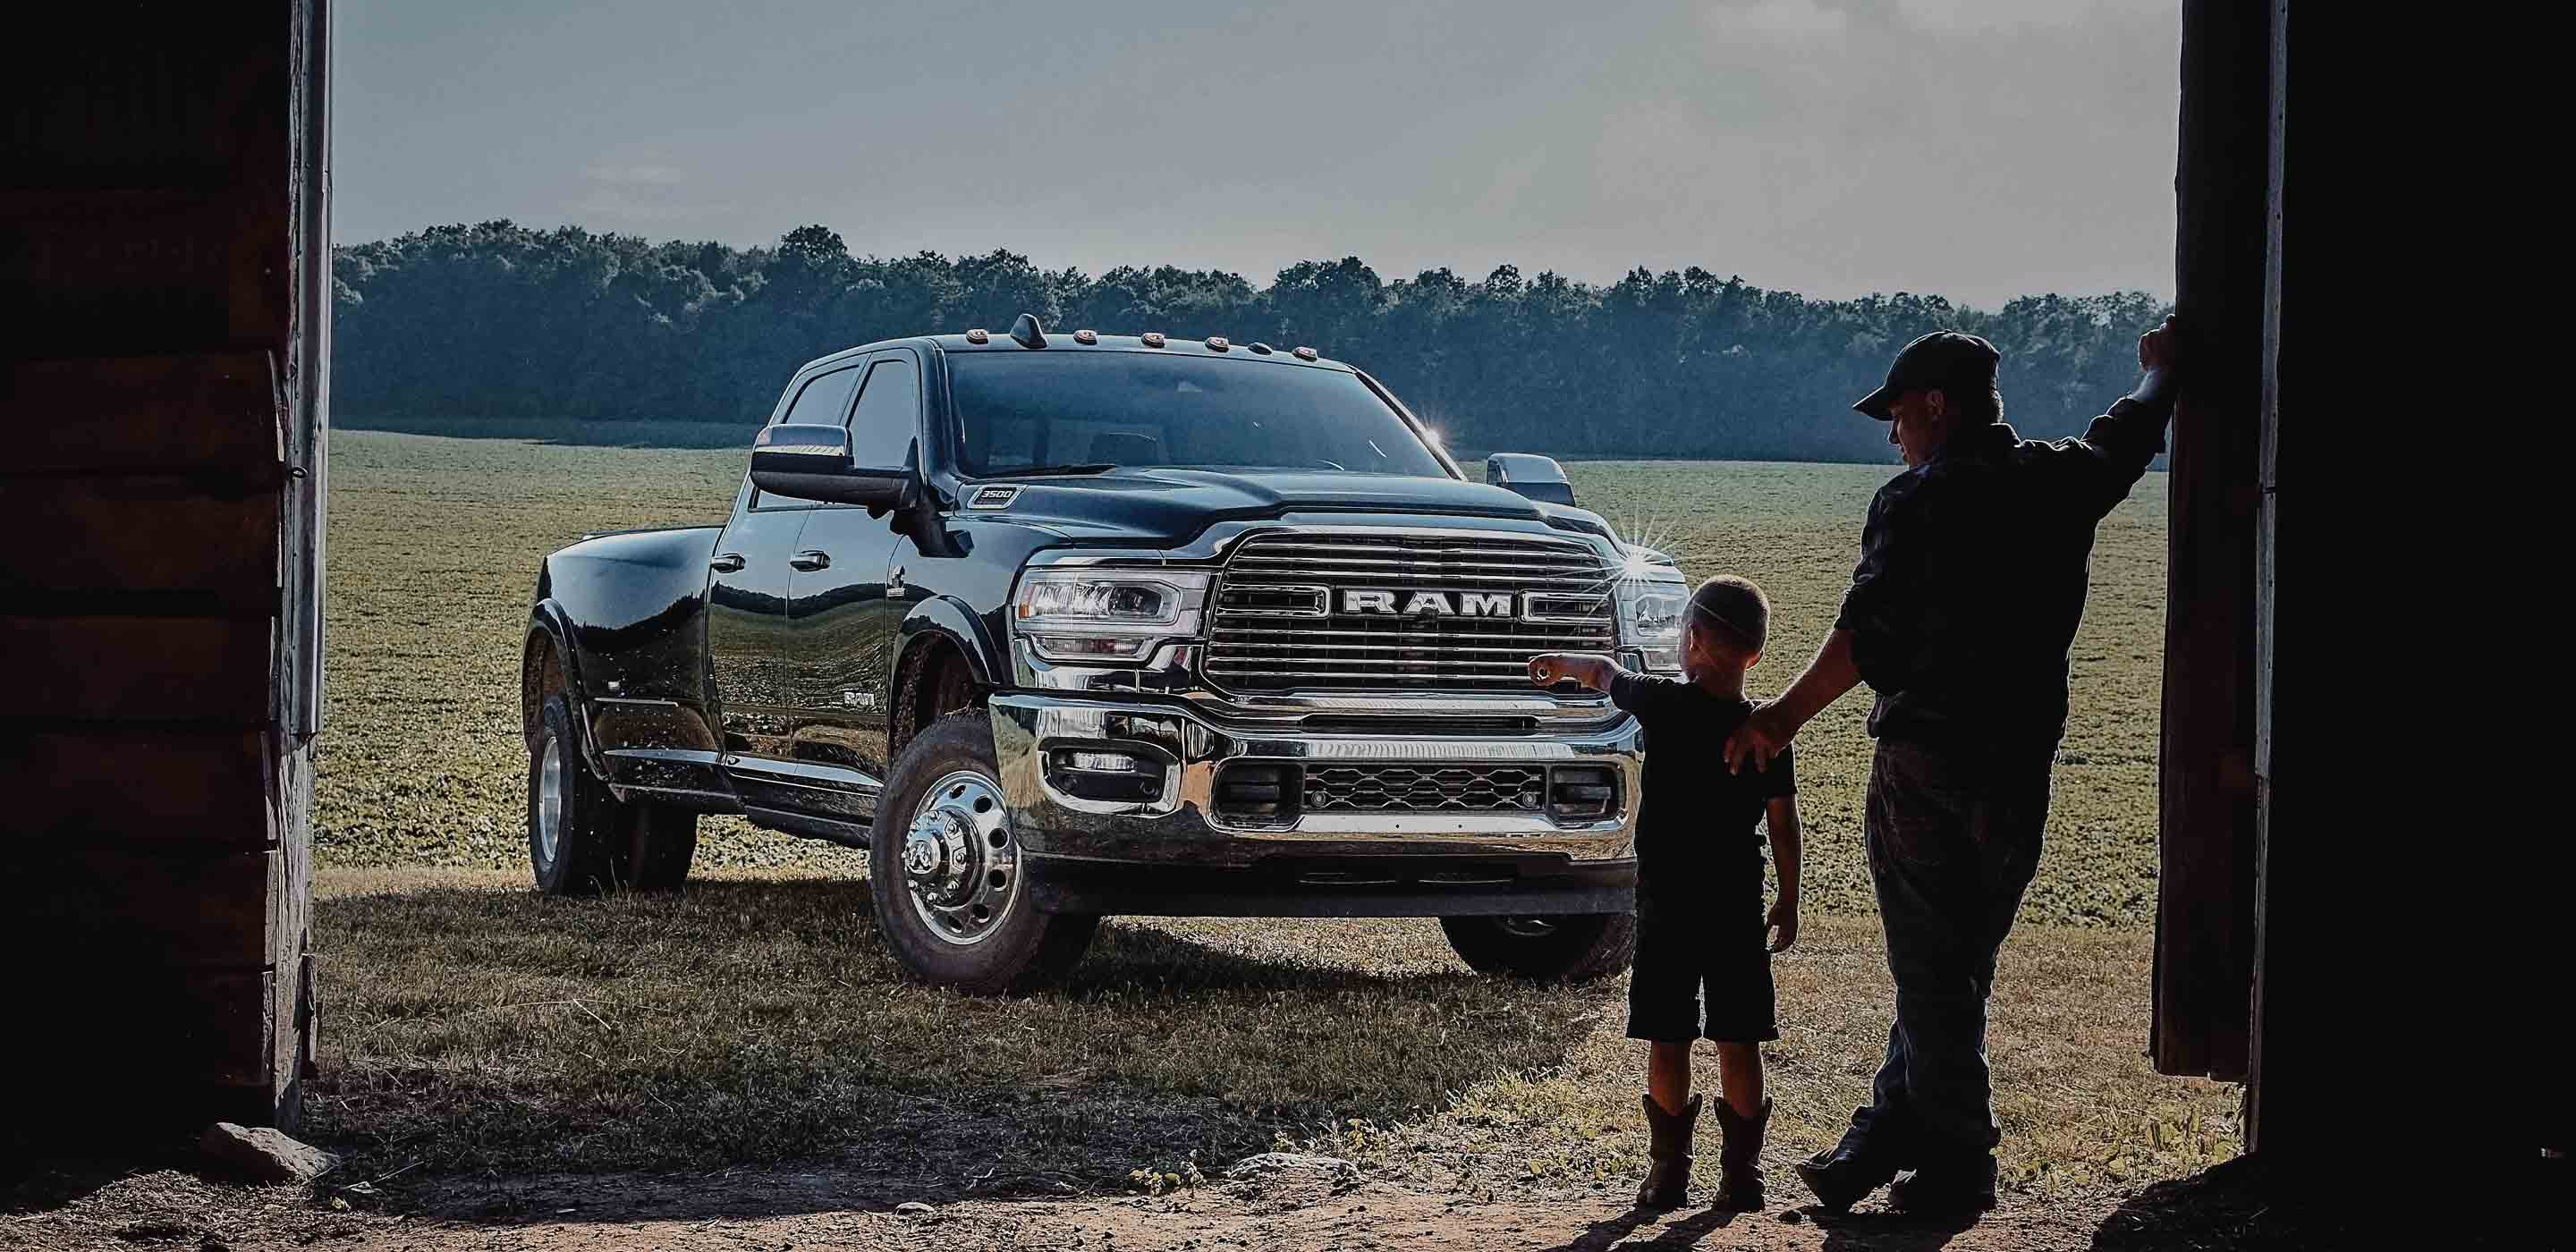 Display The 2022 Ram 3500 parked outside a barn, with two figures silhouetted in the barn doorway.